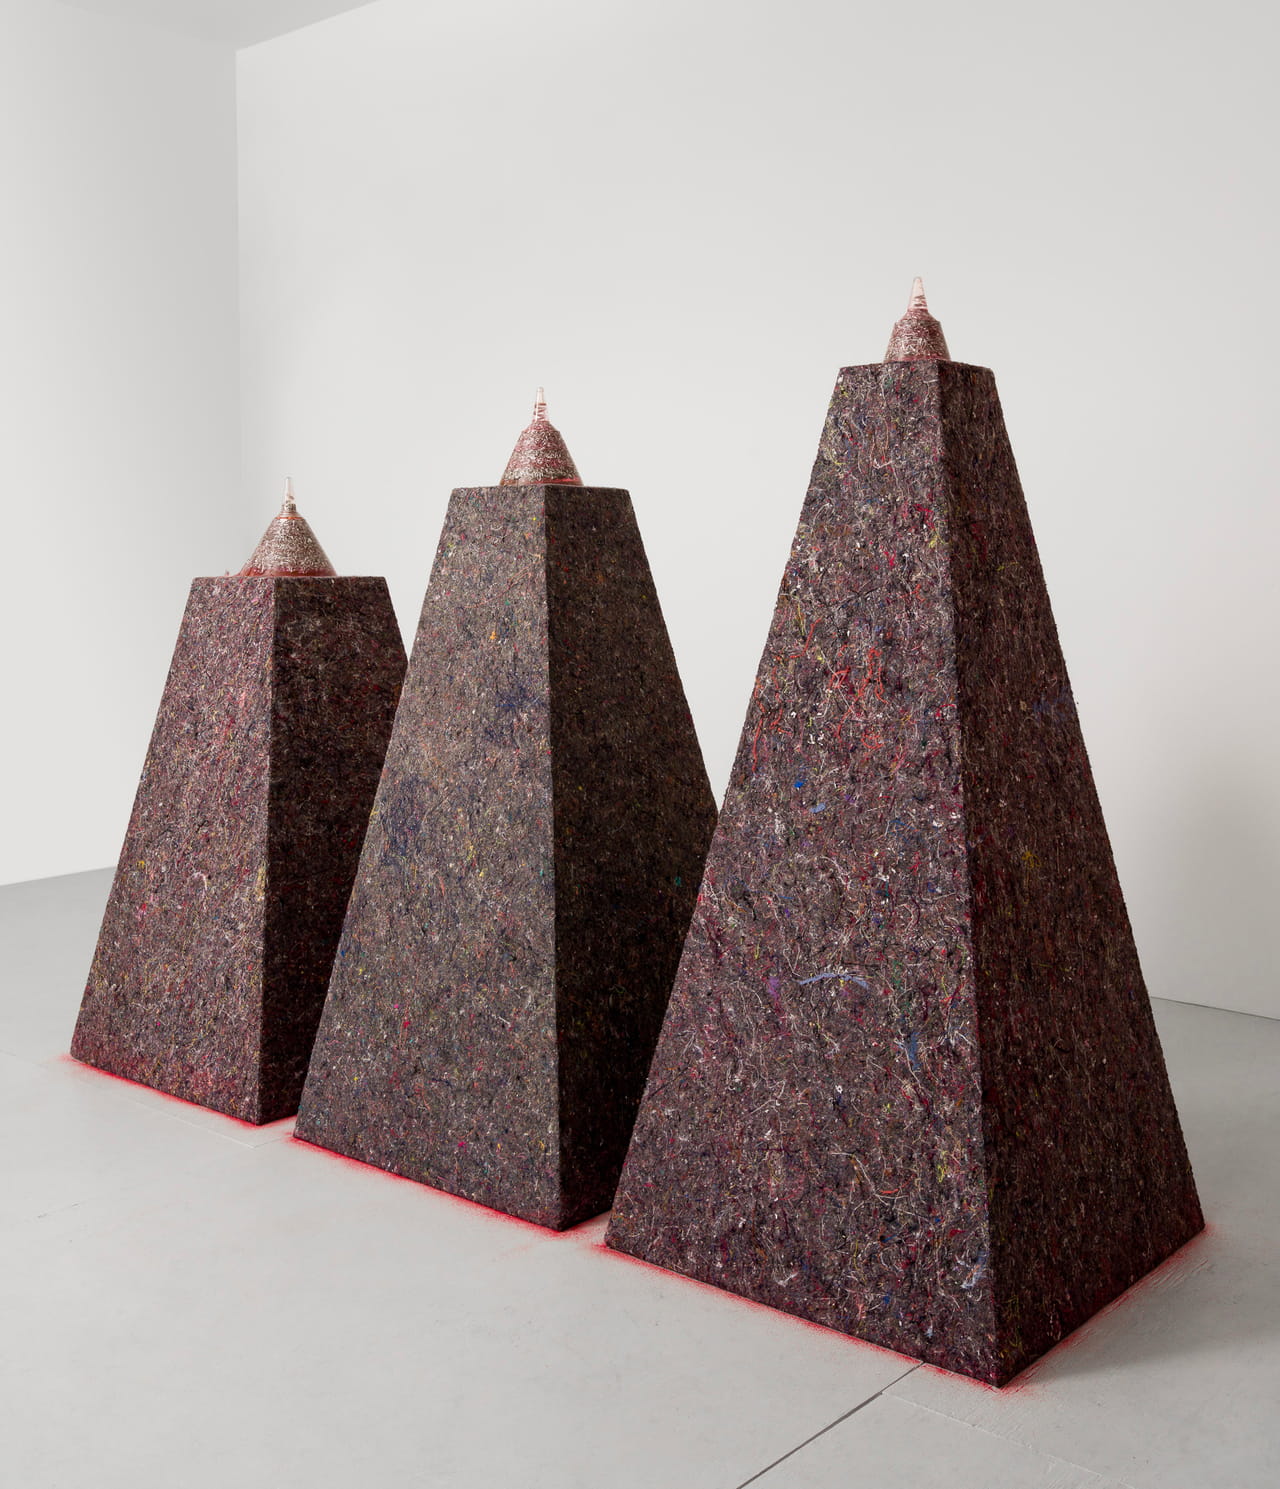 3 colorful, pyramidal plinths with resin cones sitting on them